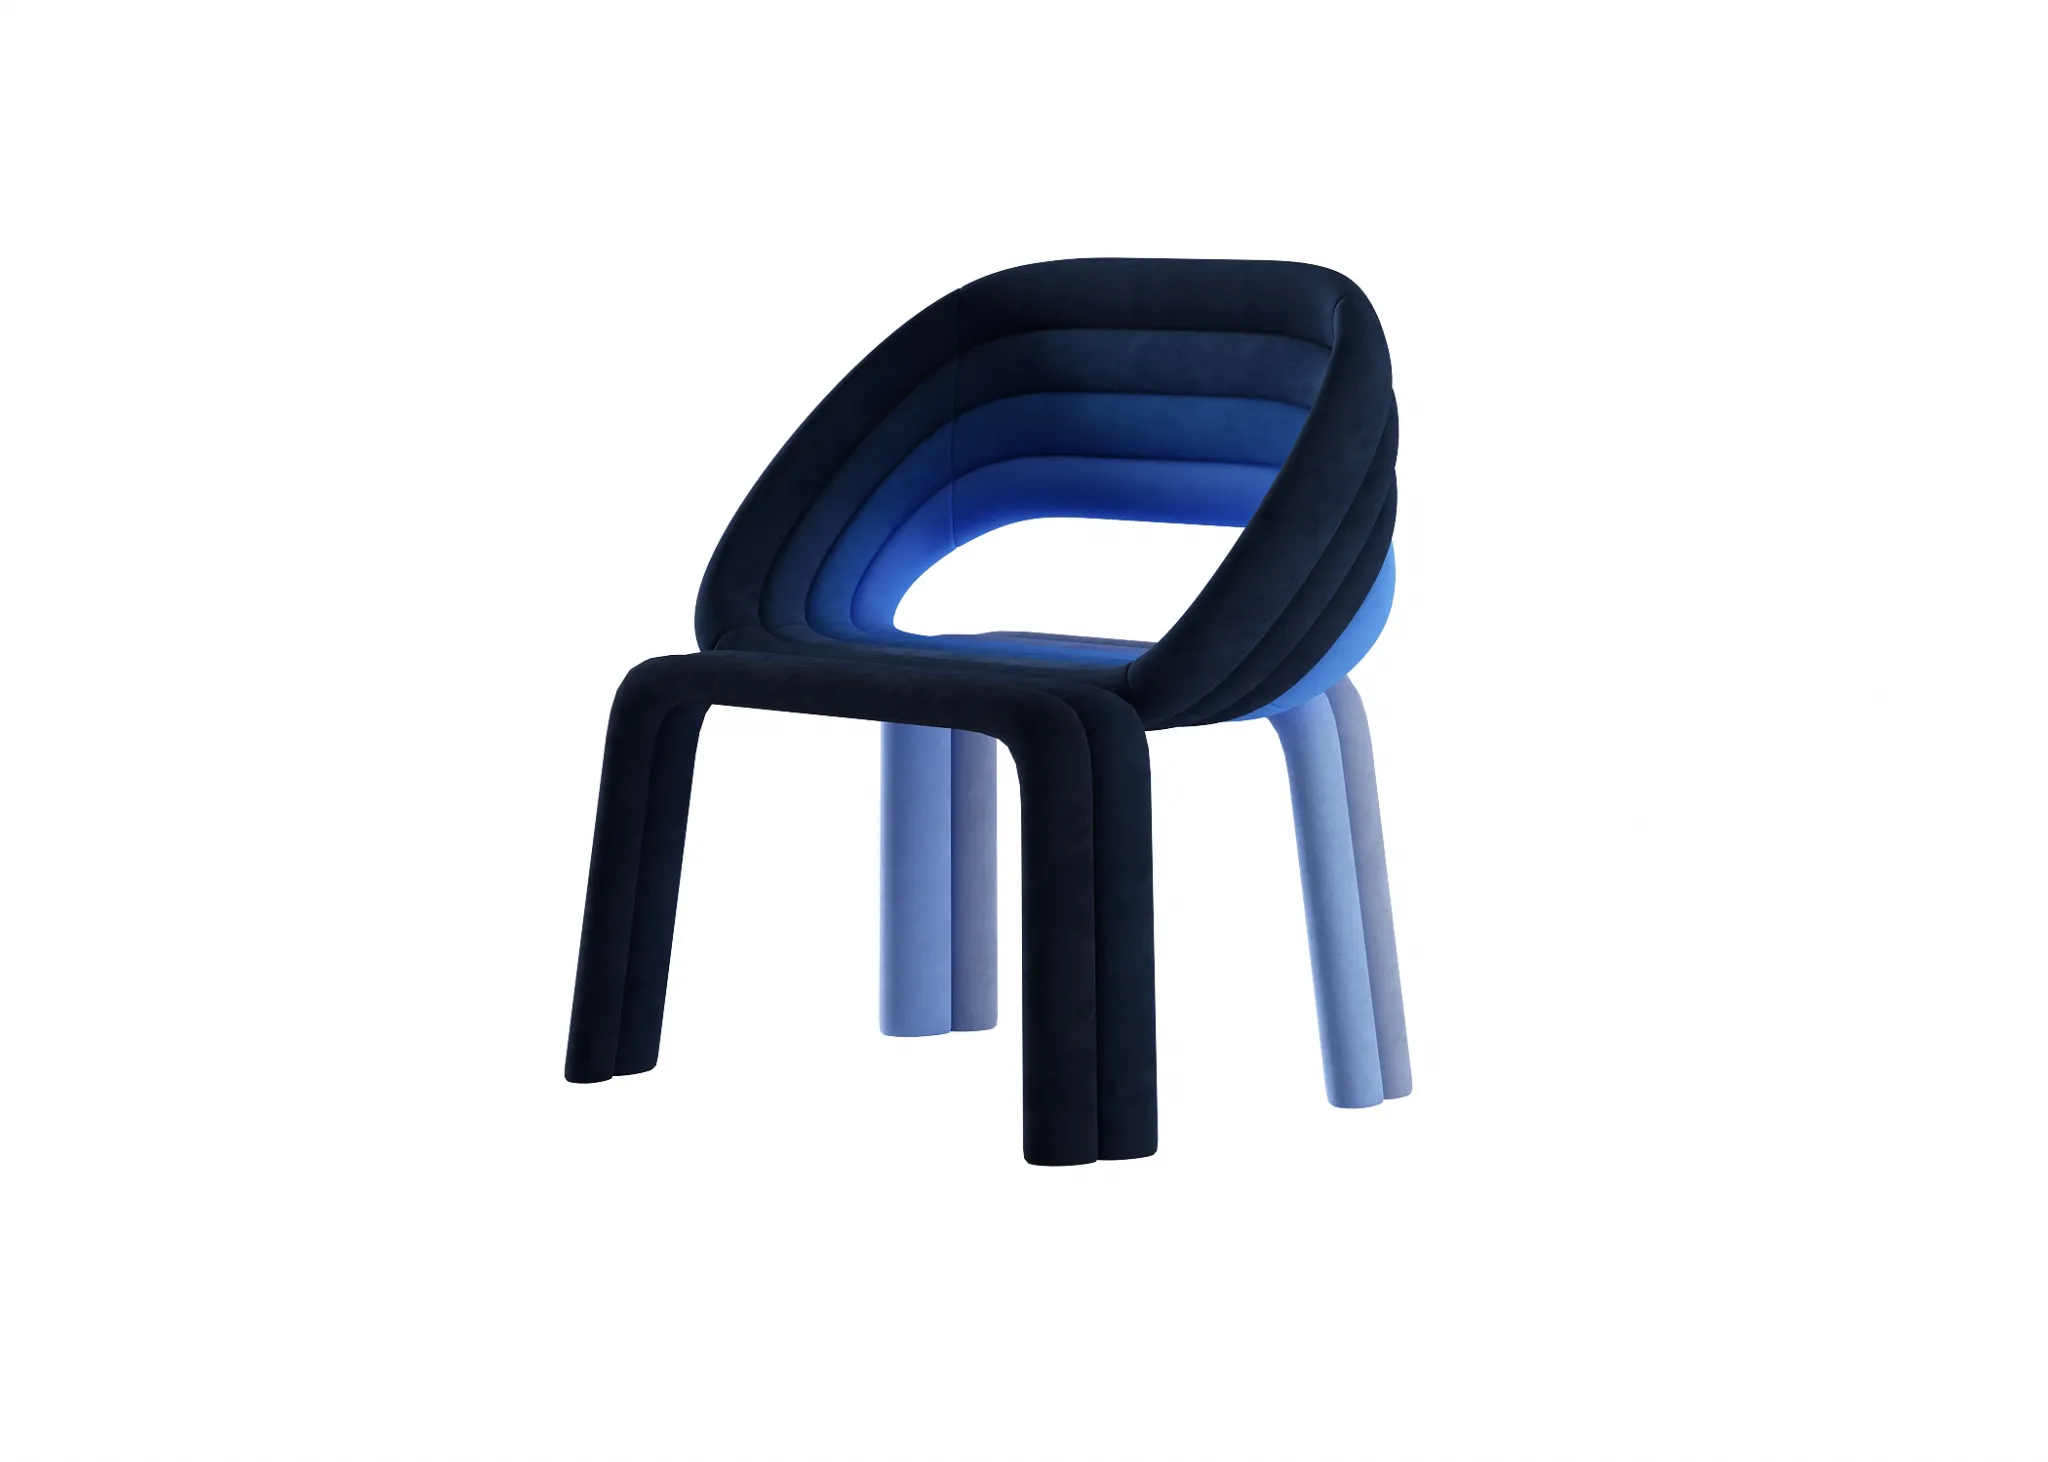 FURNITURE 3D MODELS – CHAIRS – 0383